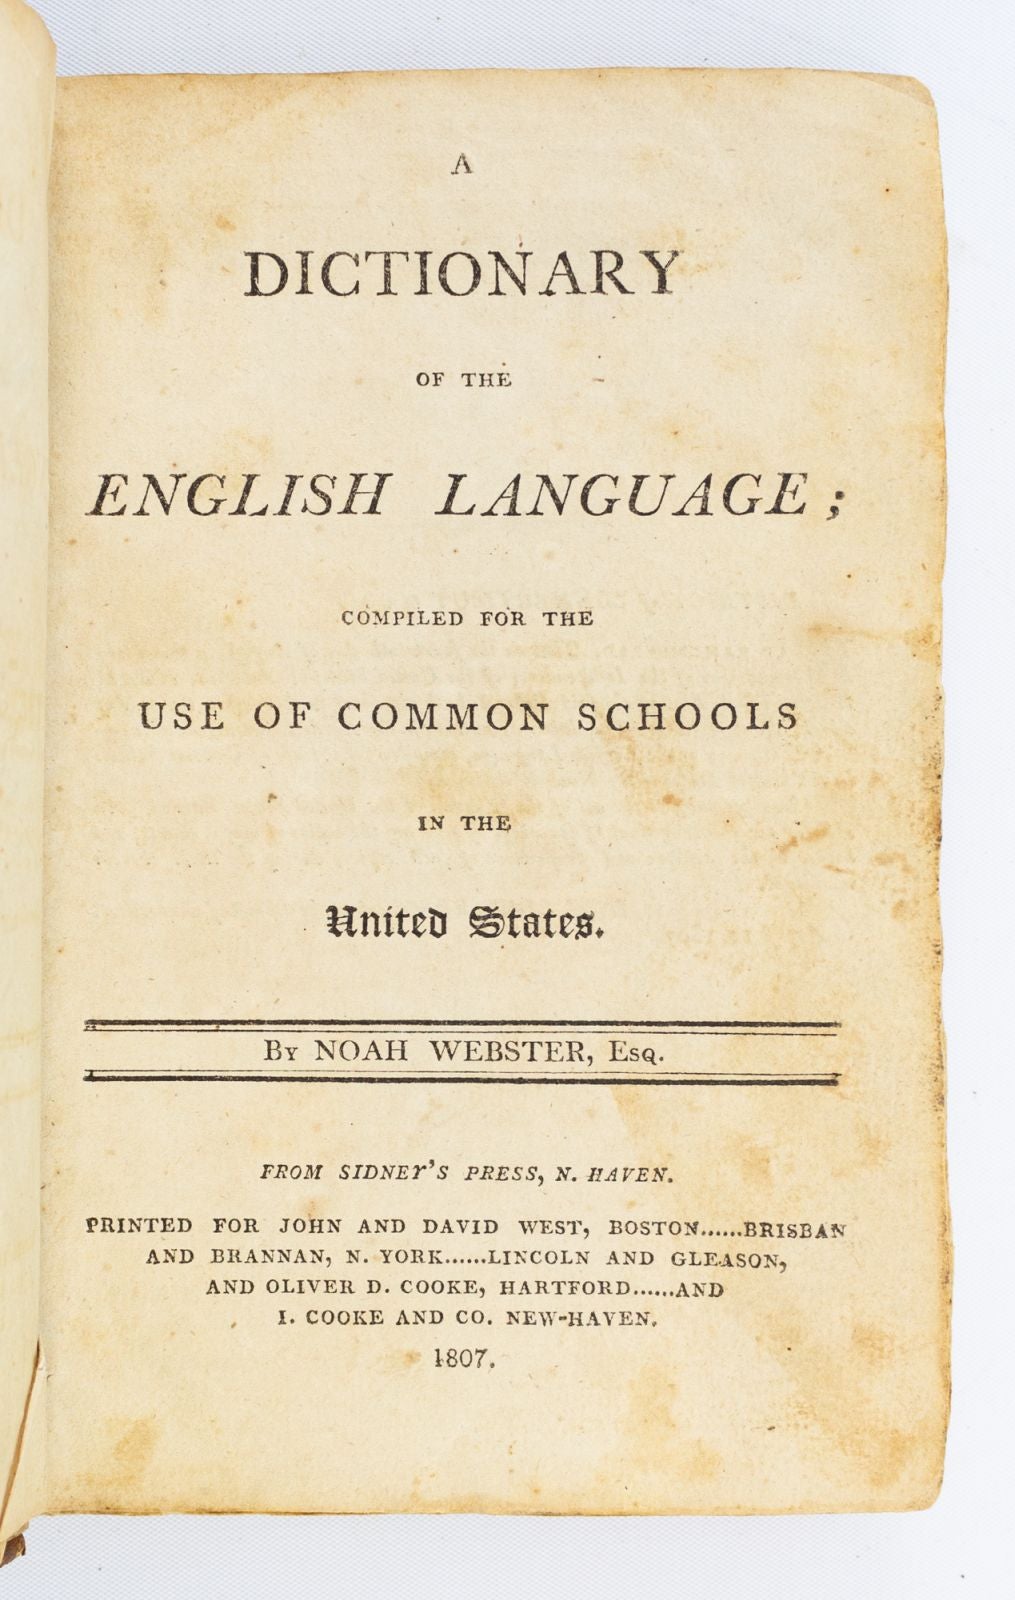 A DICTIONARY OF THE ENGLISH LANGUAGE; COMPILED FOR THE USE OF COMMON  SCHOOLS IN THE UNITED STATES by NOAH WEBSTER on Phillip J. Pirages Fine  Books and 